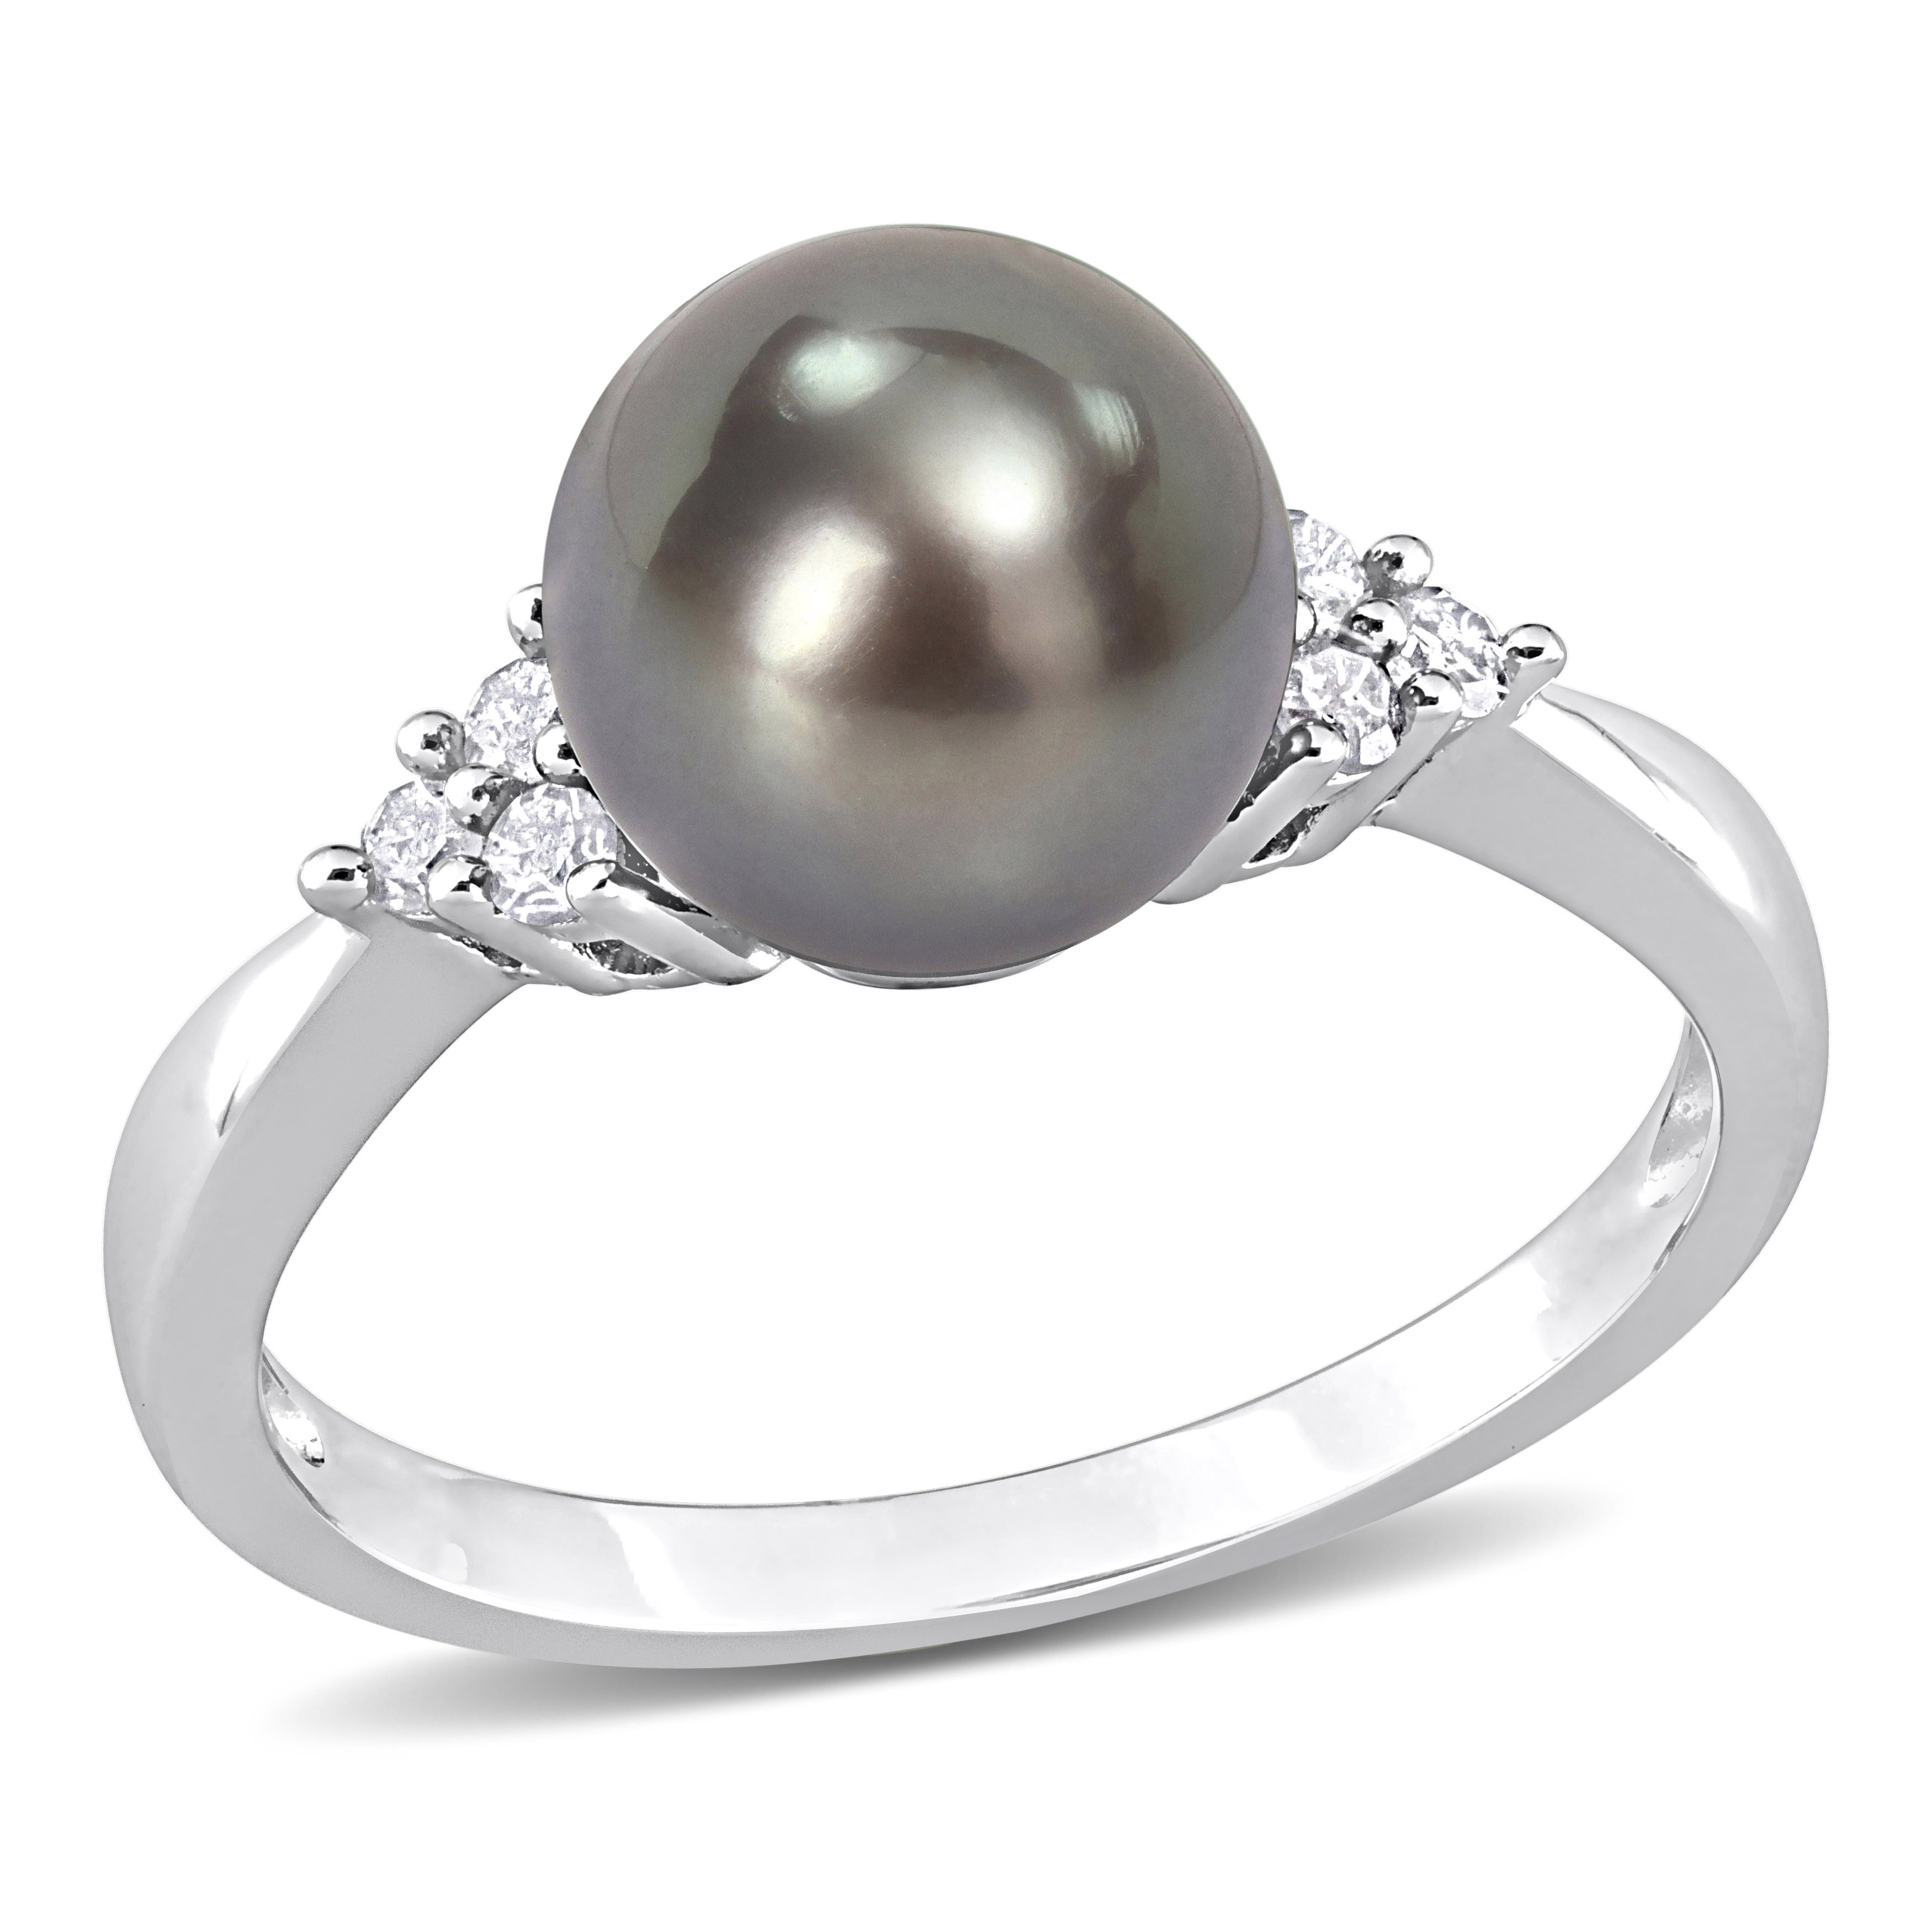 8-8.5MM Black Tahitian Pearl and 1/8 CT TDW Diamond Ring in Sterling Silver